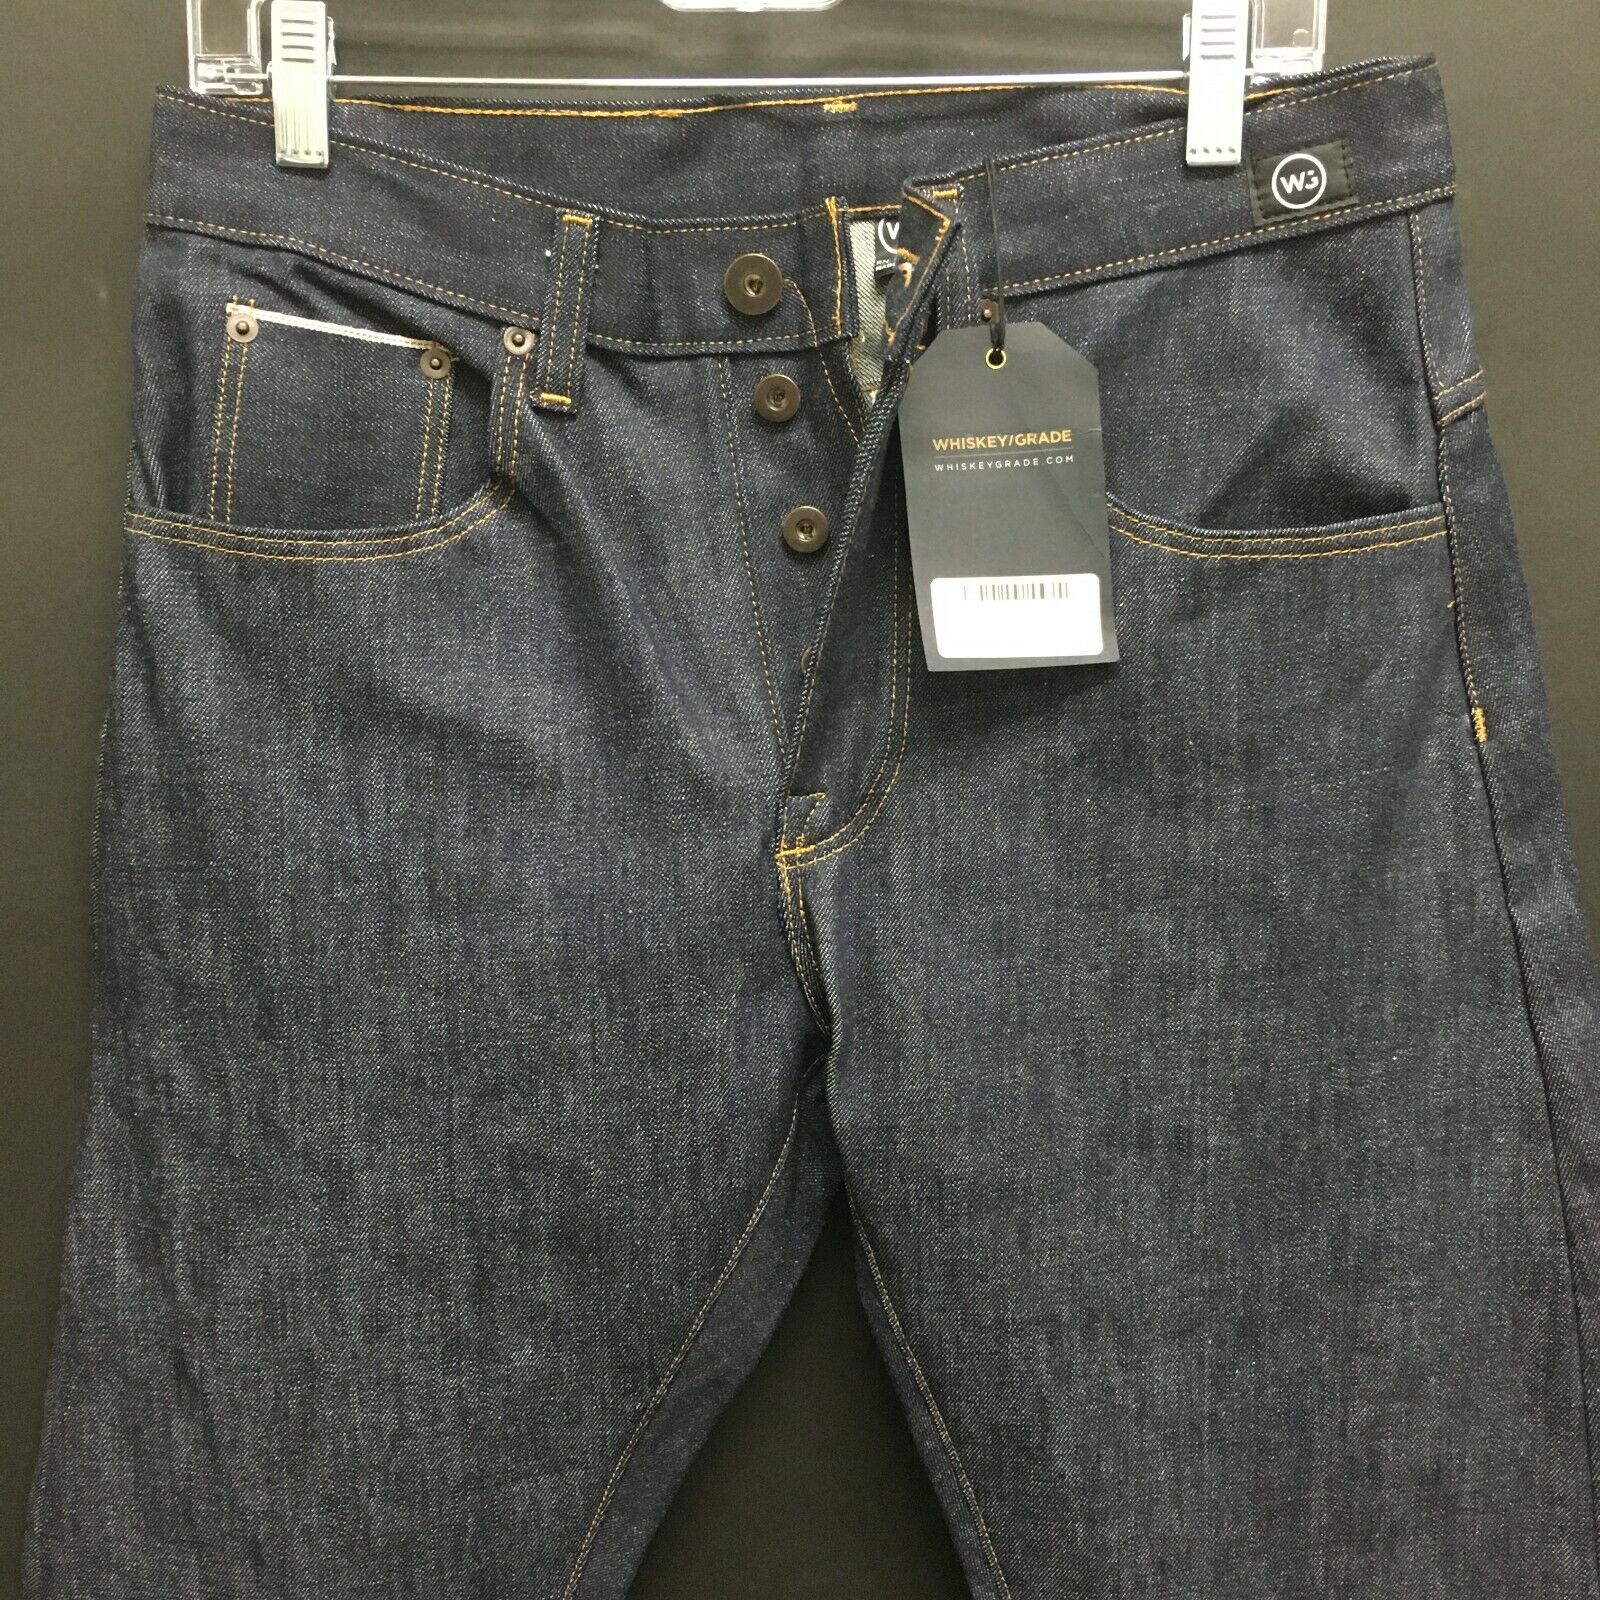 NEW Mens 28 x 33 WHISKEY/GRADE Selvedge Classic Curve Jeans